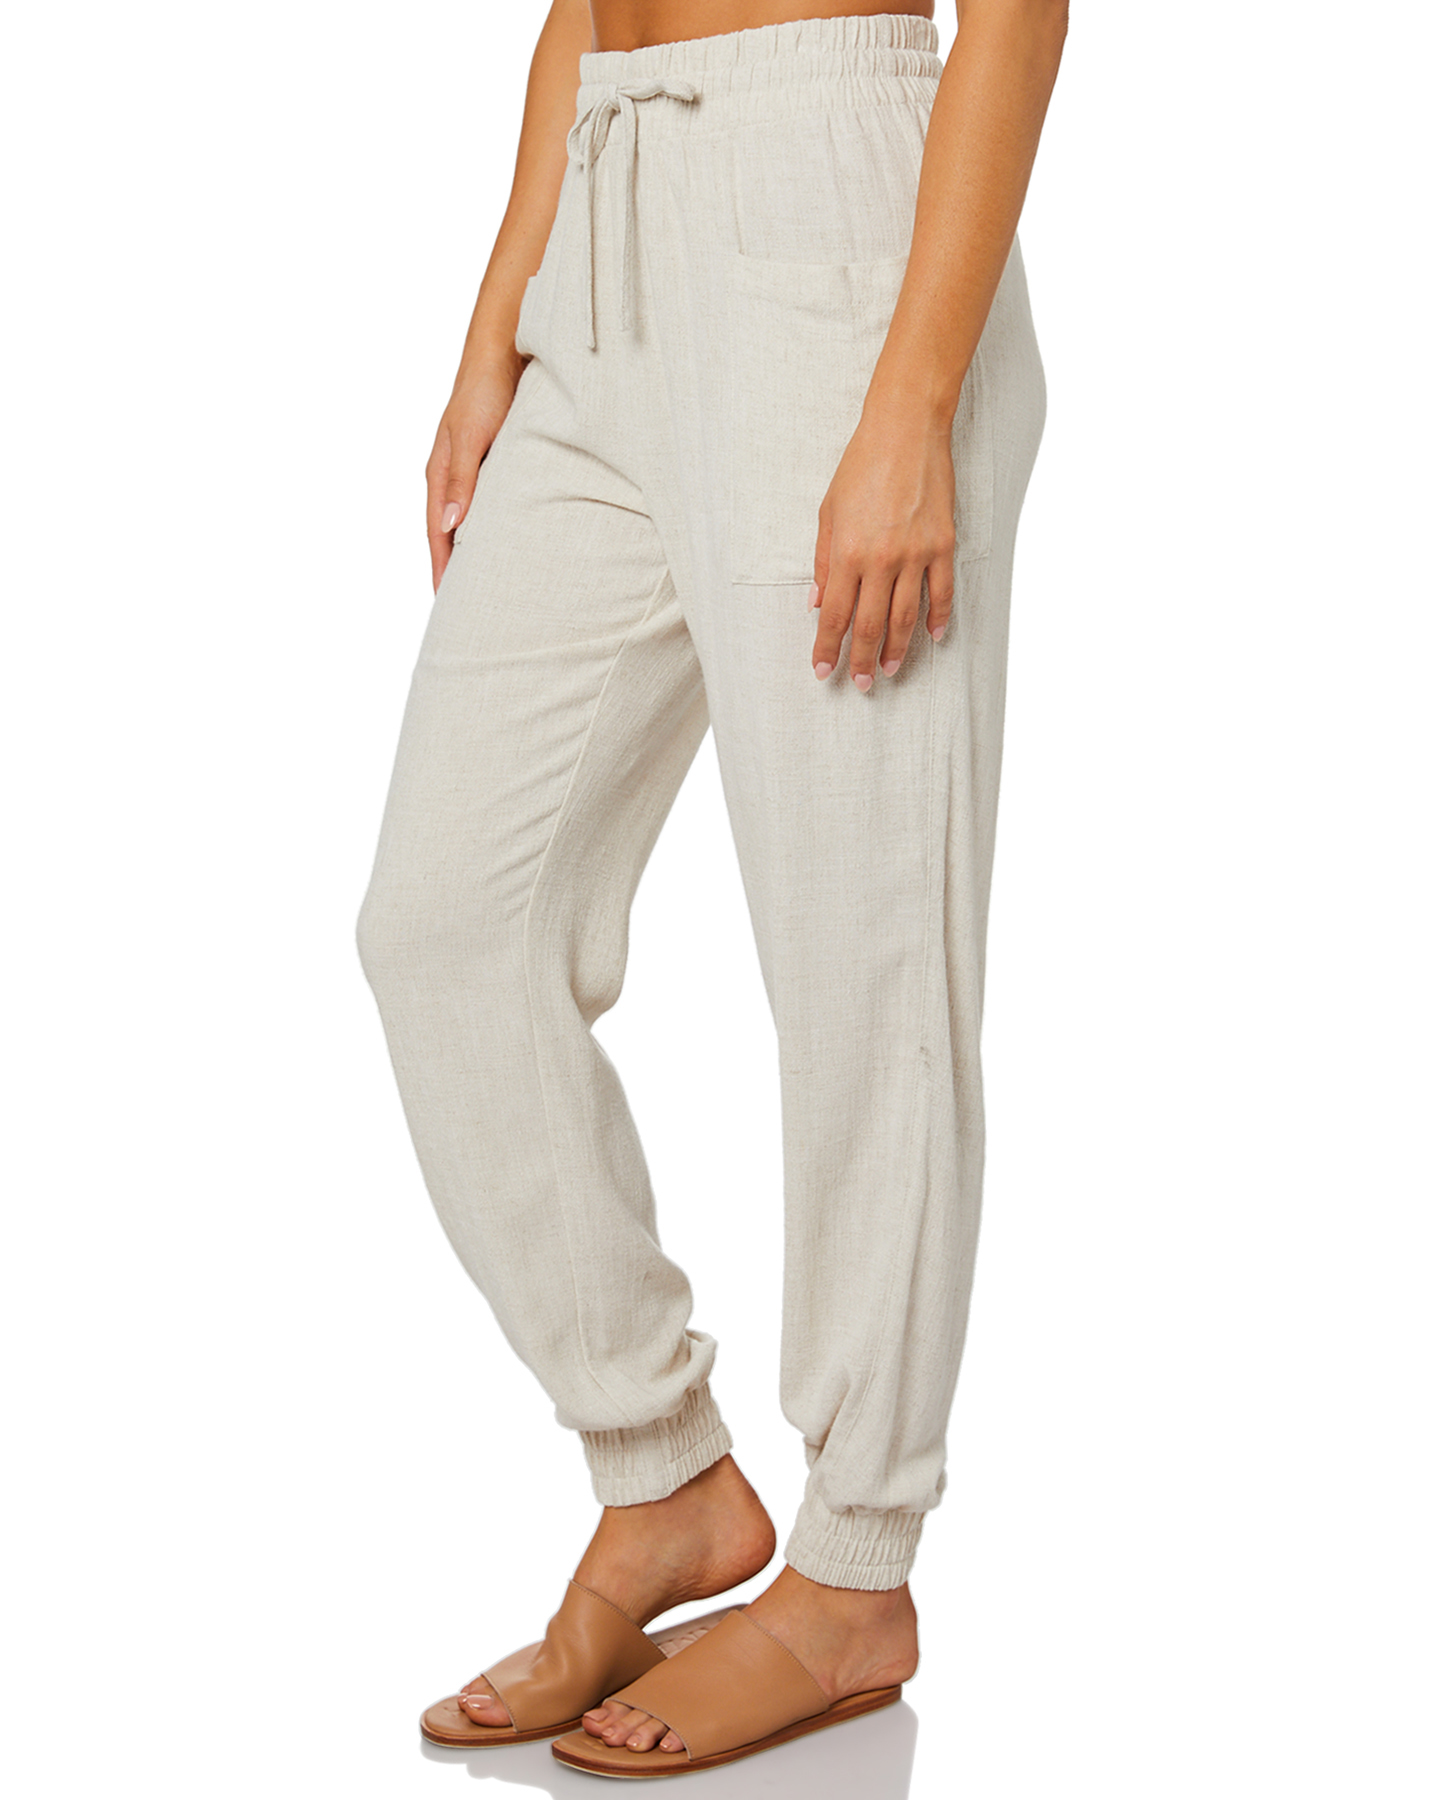 Rusty Mura Linen Pant - Sable Marle | SurfStitch